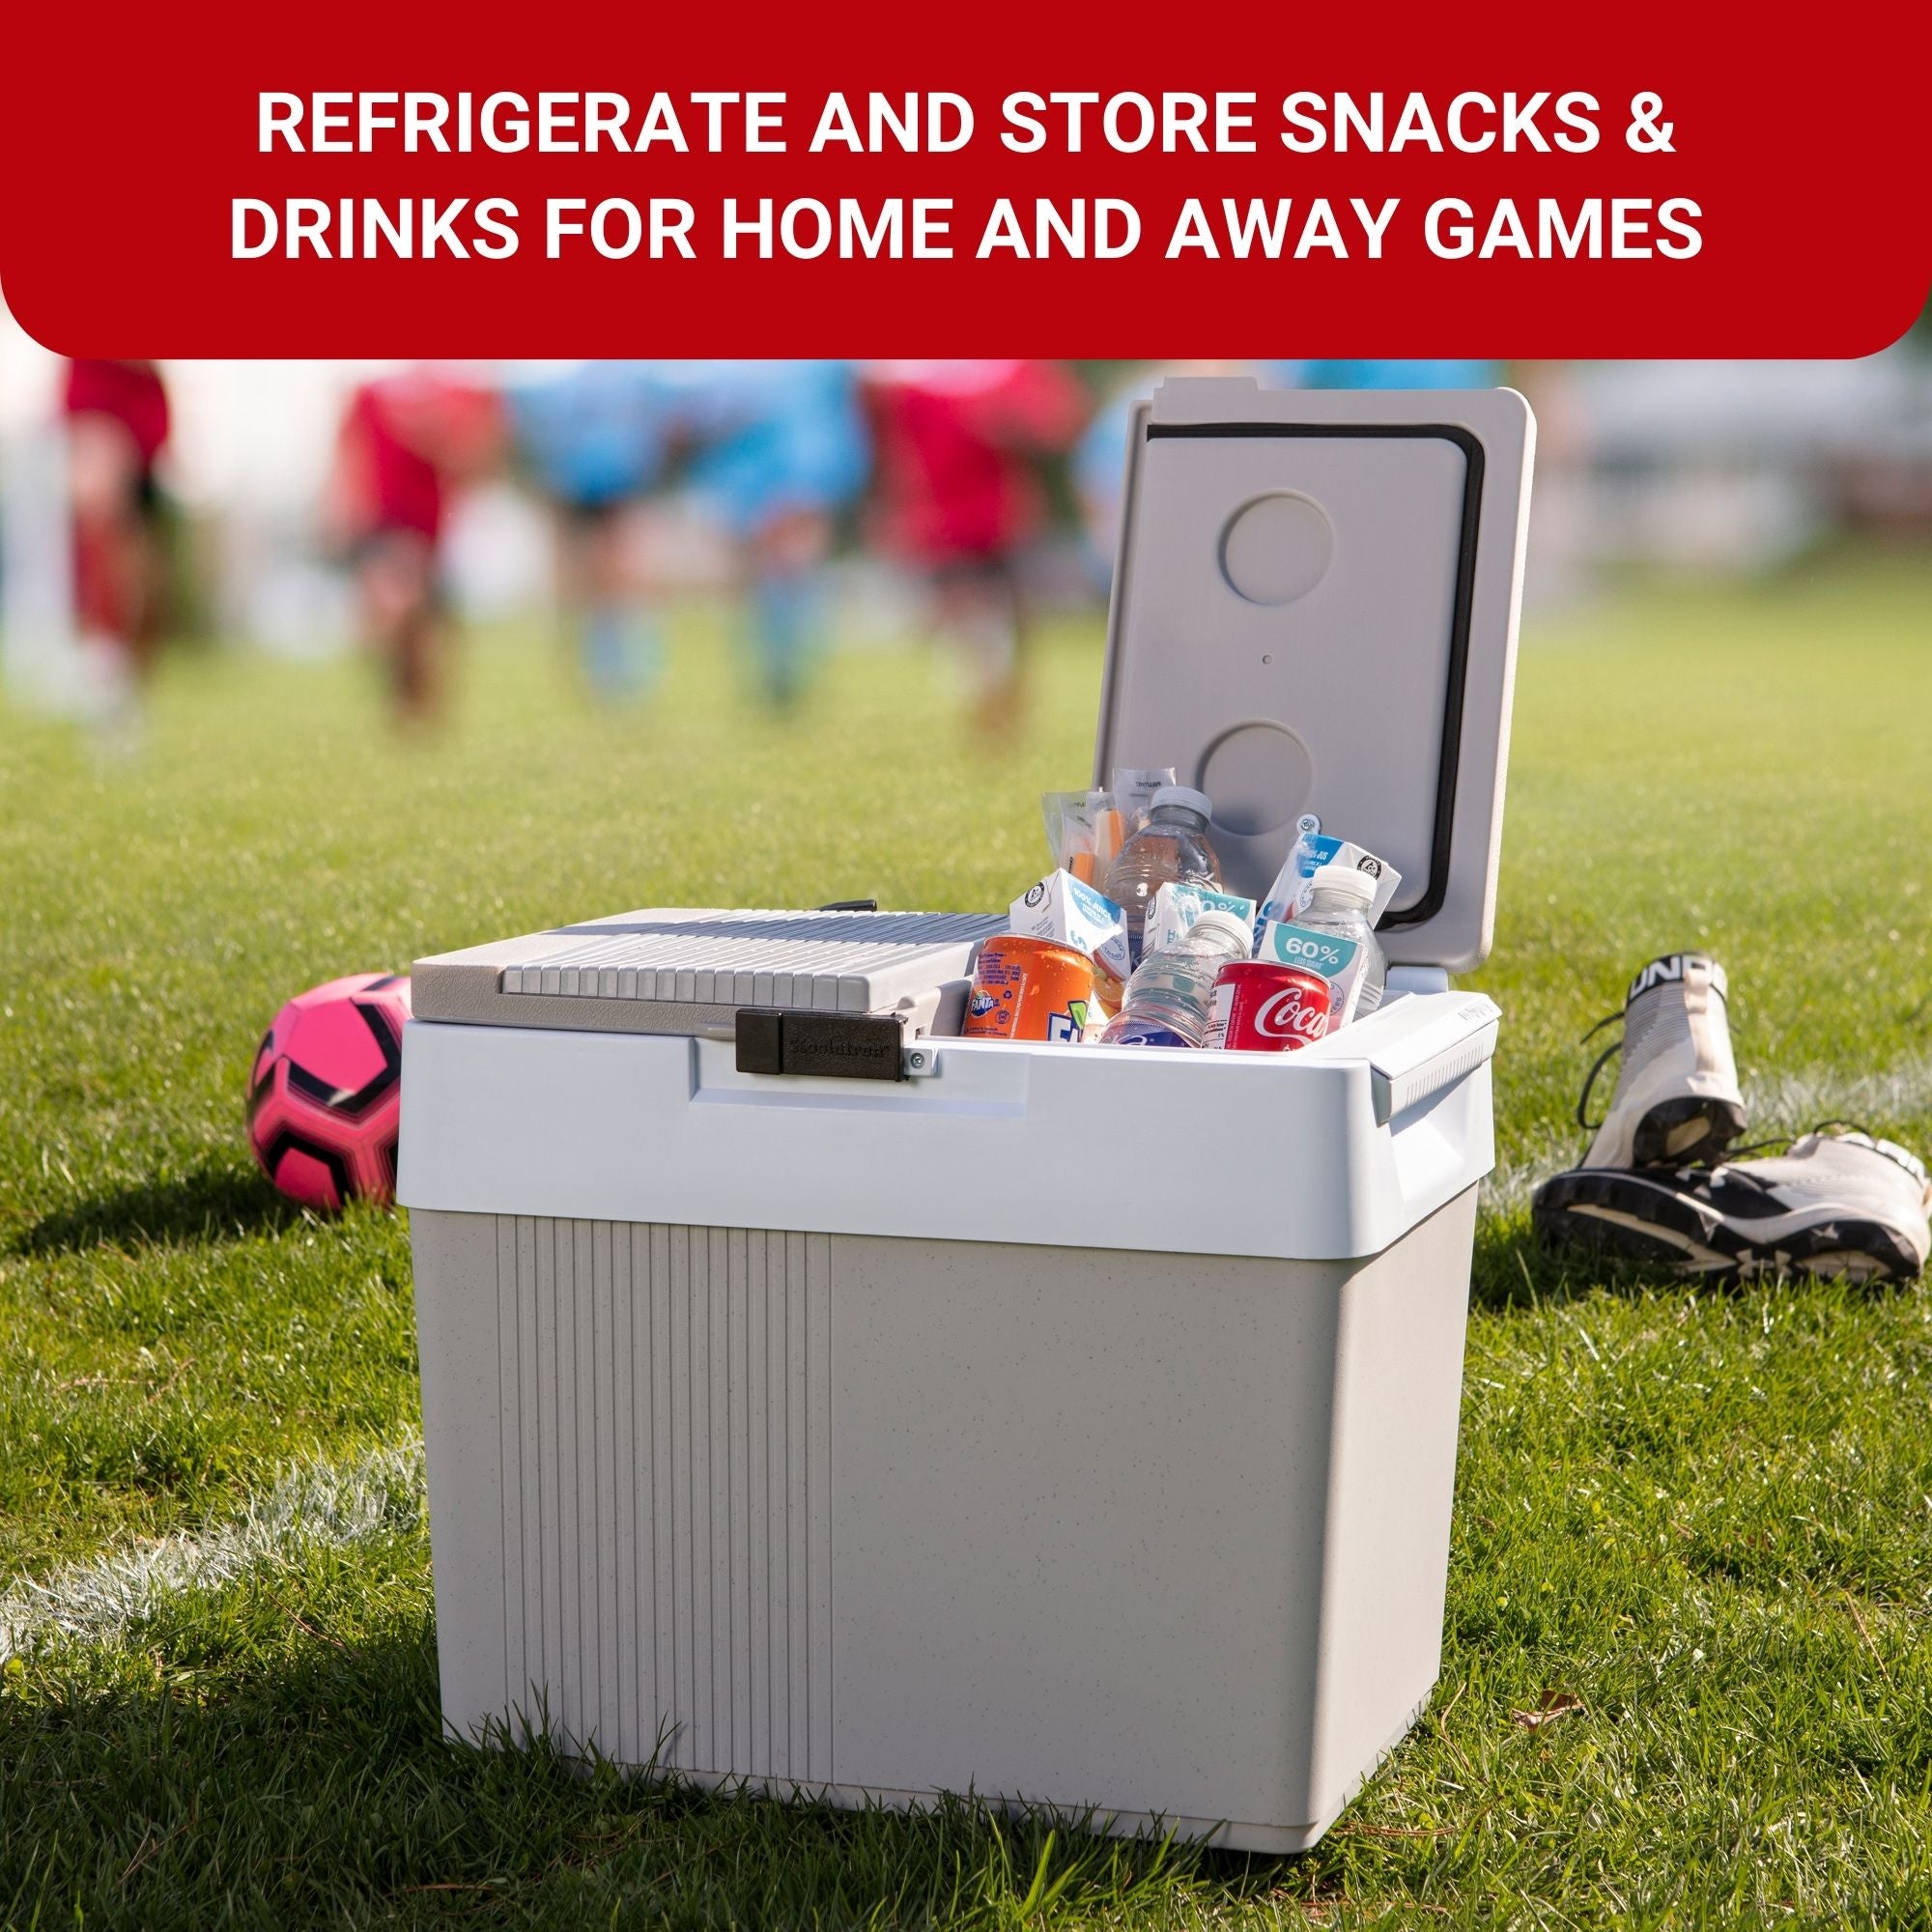 Koolatron portable 12V cooler/warmer filled with drinks with one half of lid open on a grass soccer pitch. Text above reads, "REFRIGERATE AND STORE SNACKS AND DRINKS FOR HOME AND AWAY GAMES"